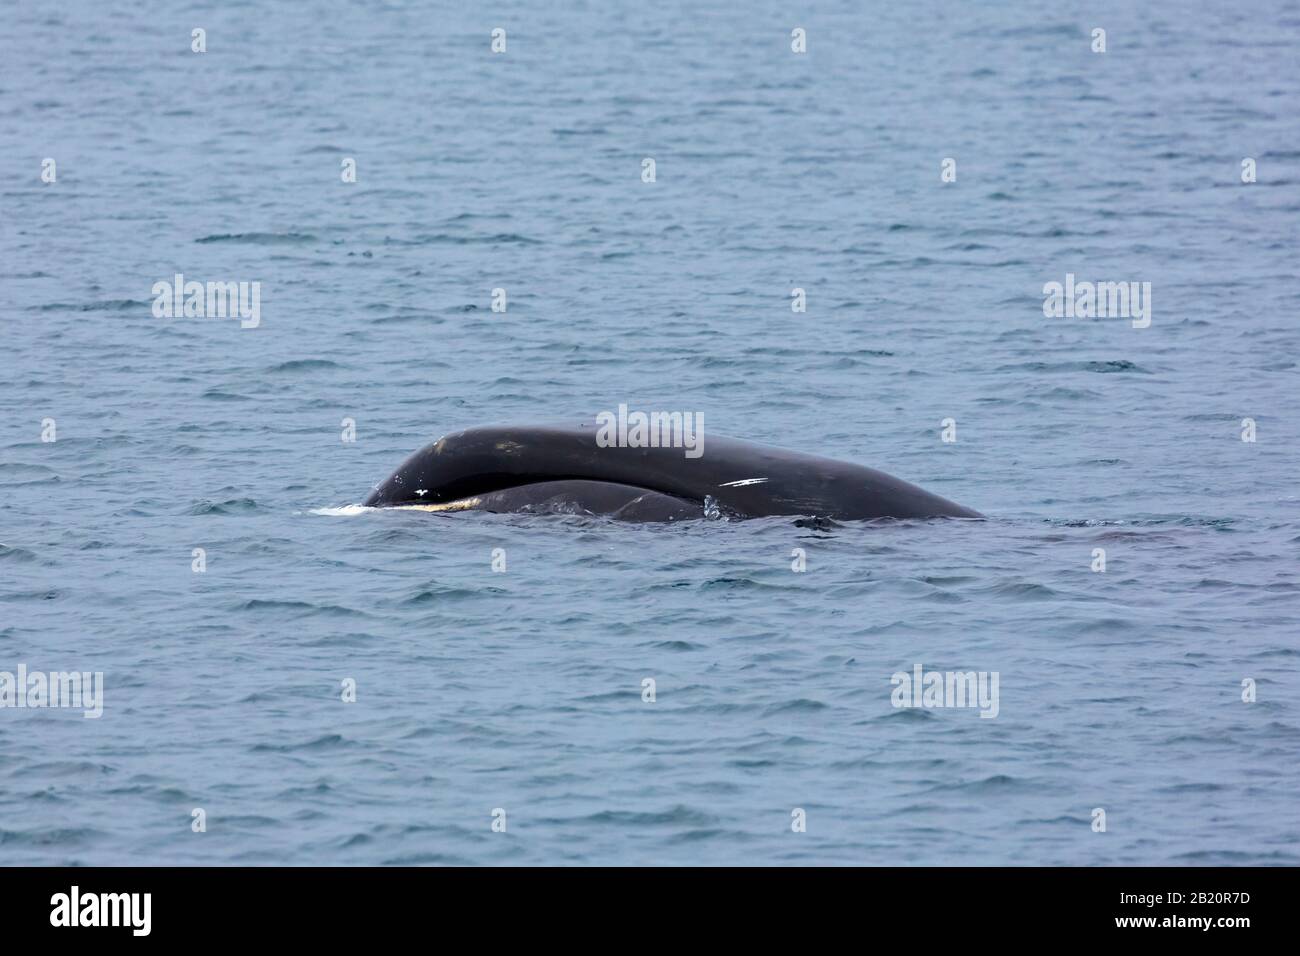 Bowhead whale / Greenland right whale / Arctic whale (Balaena mysticetus) with scars on head surfacing the Arctic Ocean, Svalbard / Spitsbergen, Norwa Stock Photo